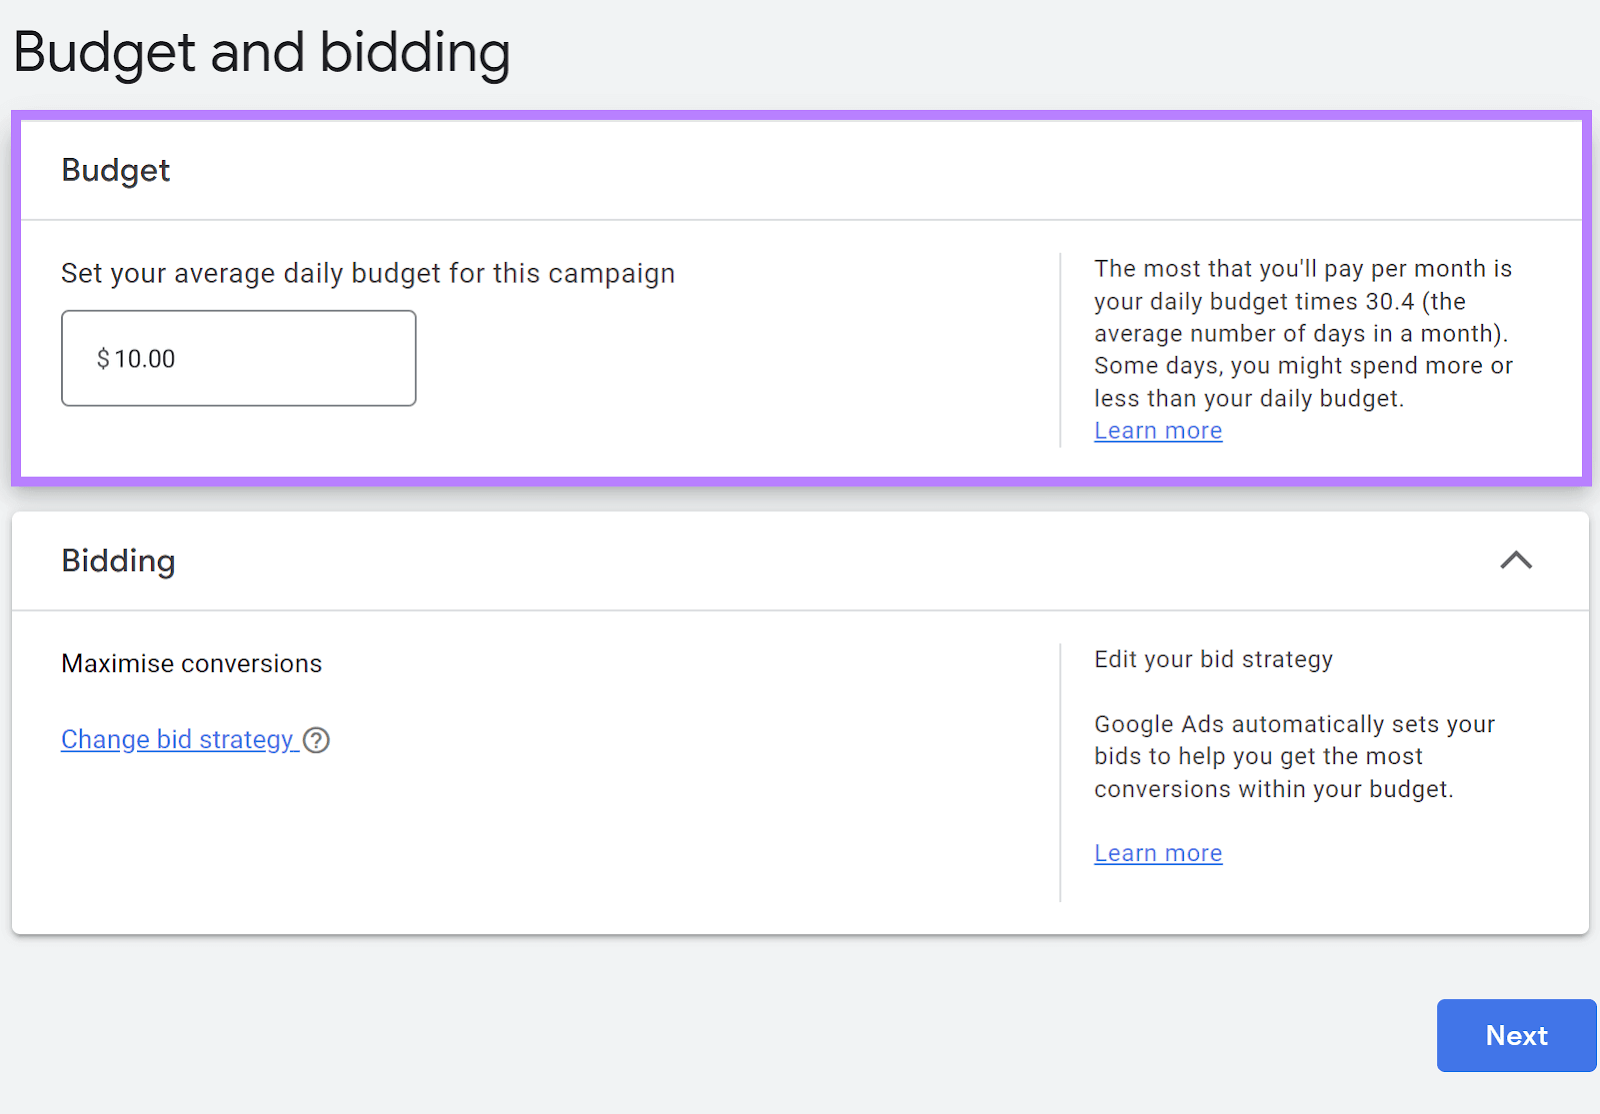 "Budget and bidding" section in Google Ads